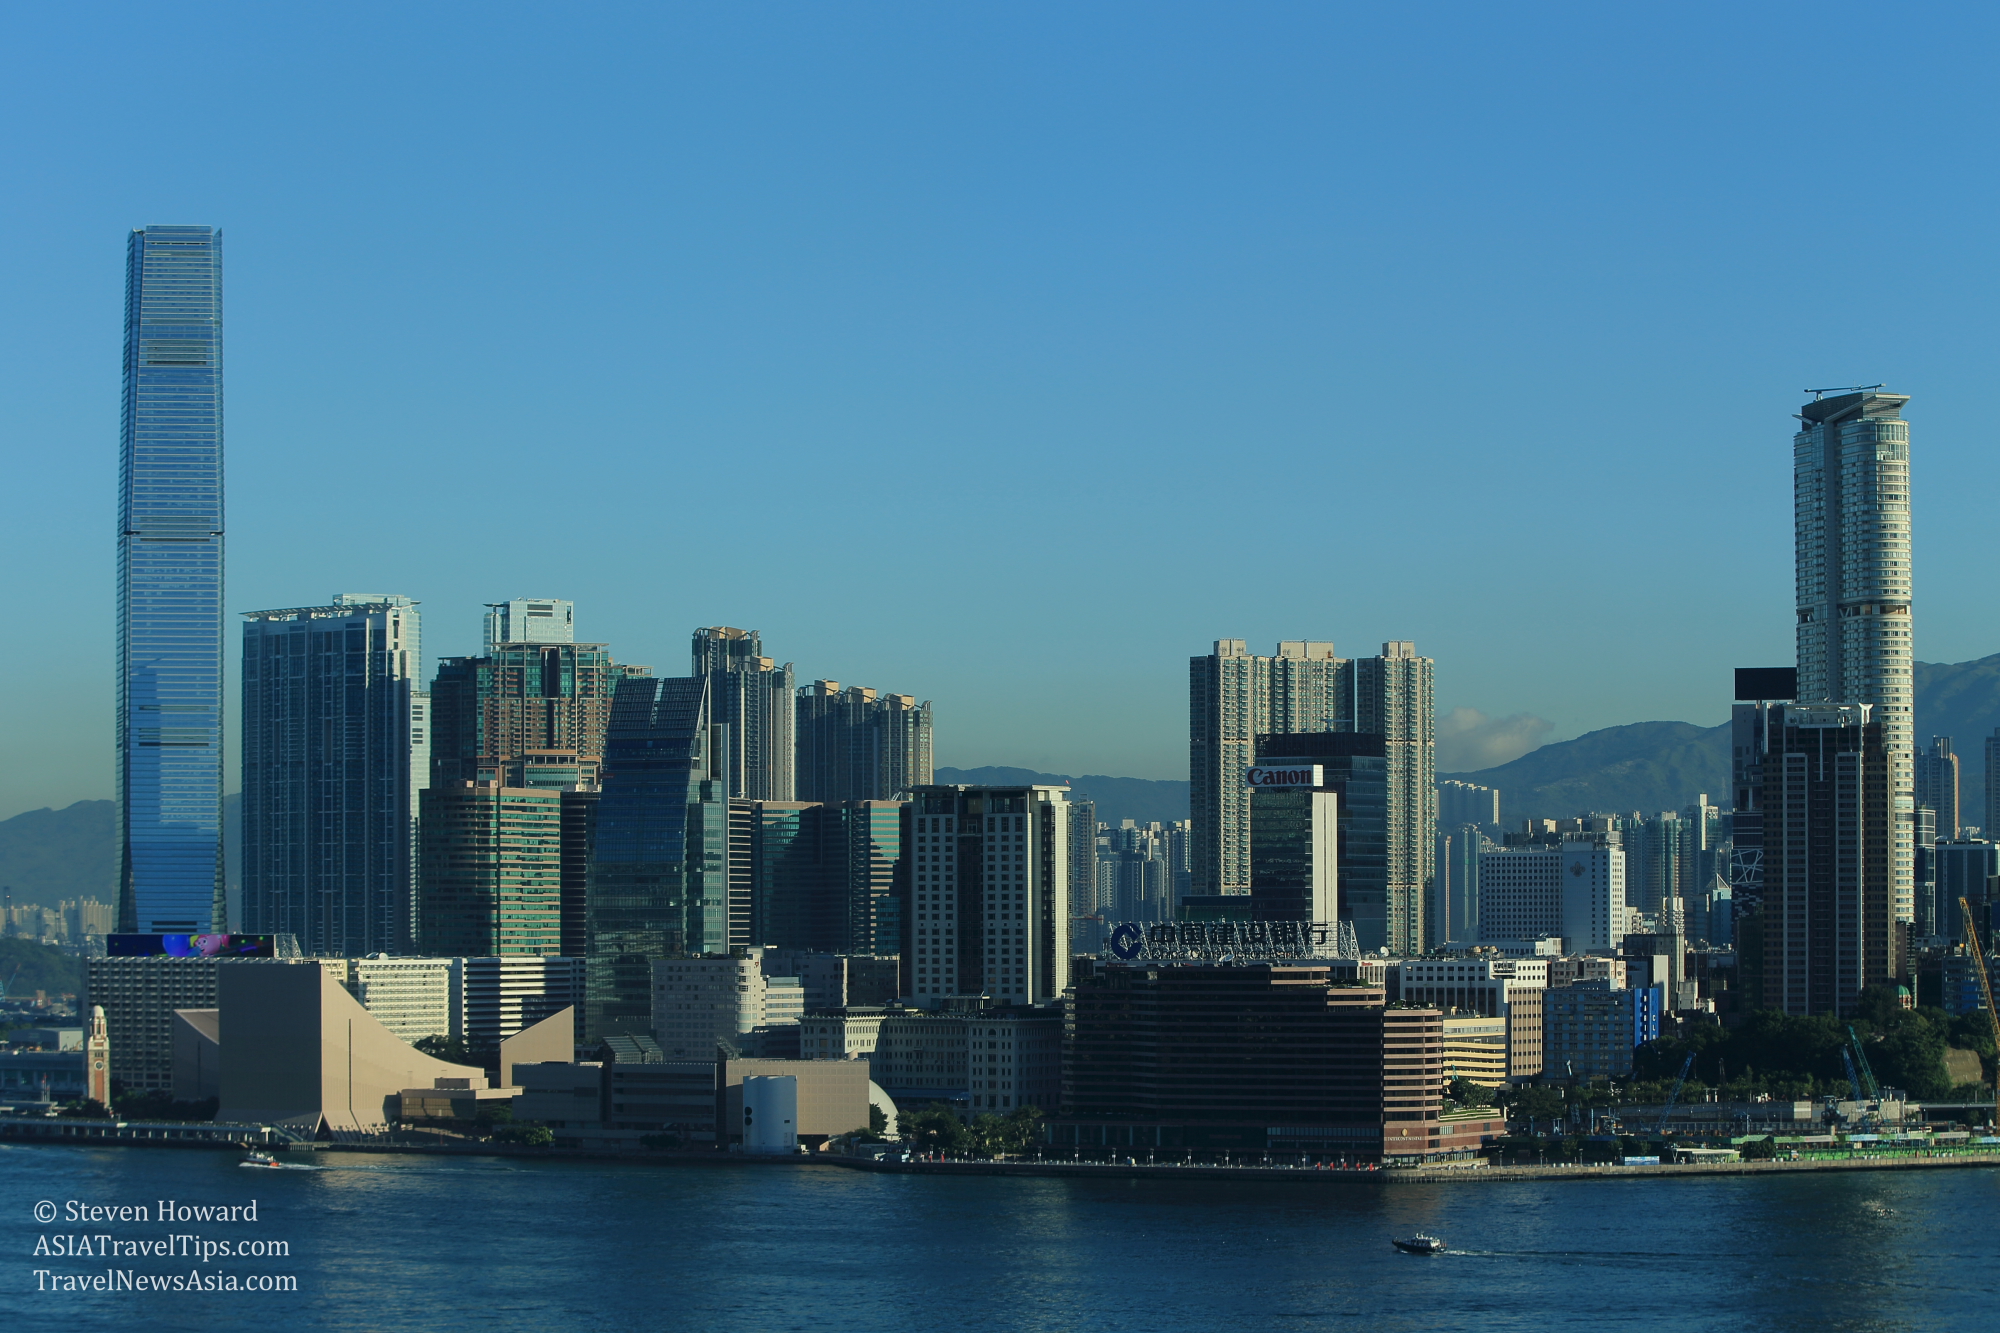 Hong Kong's majestic Victoria Harbour in August 2013. Picture by Steven Howard of TravelNewsAsia.com Click to enlarge.